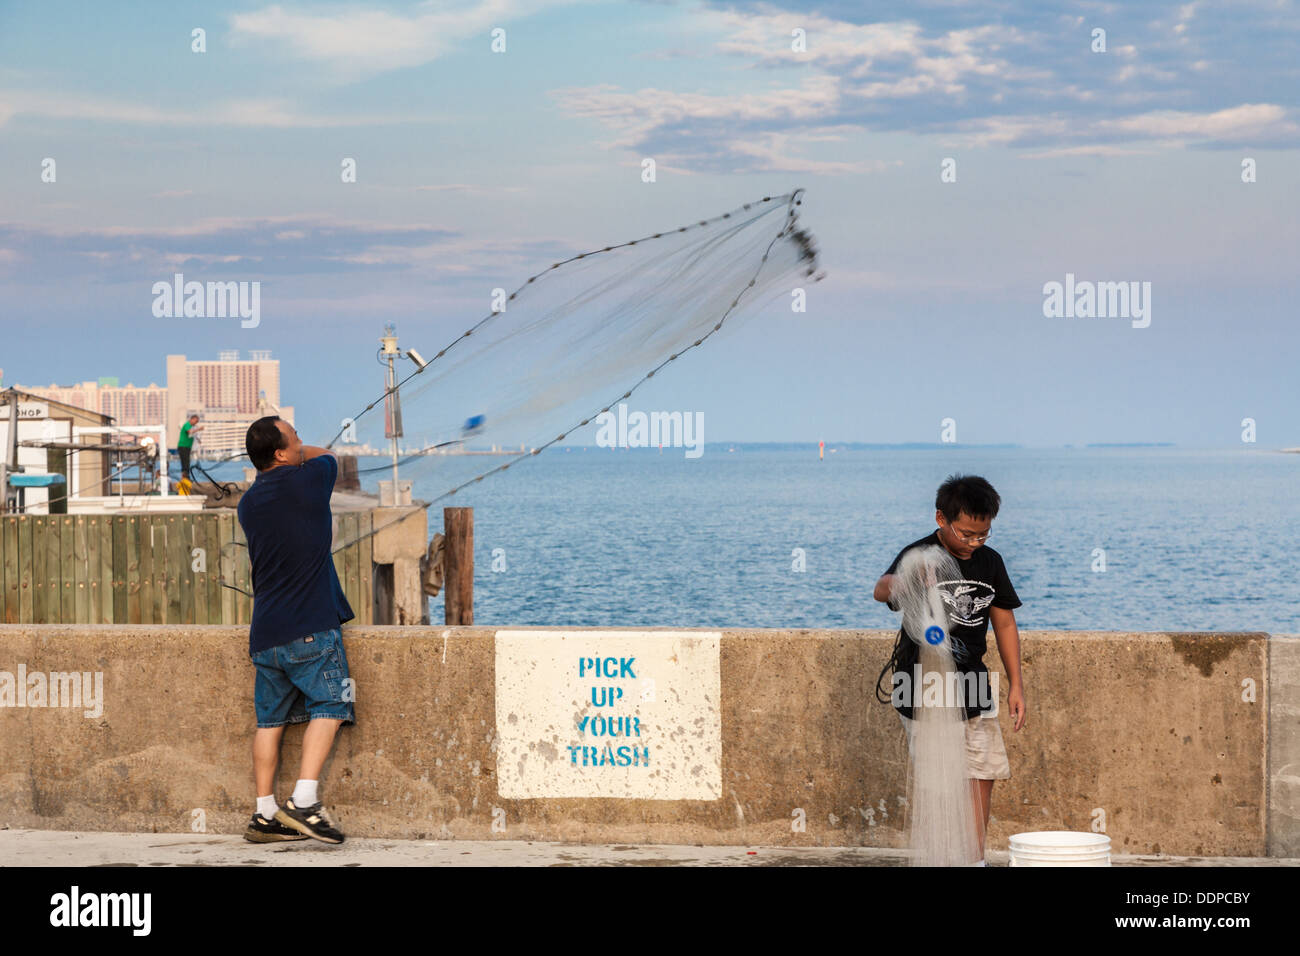 https://c8.alamy.com/comp/DDPCBY/man-and-son-fishing-for-shrimp-by-throwing-cast-nets-from-the-small-DDPCBY.jpg